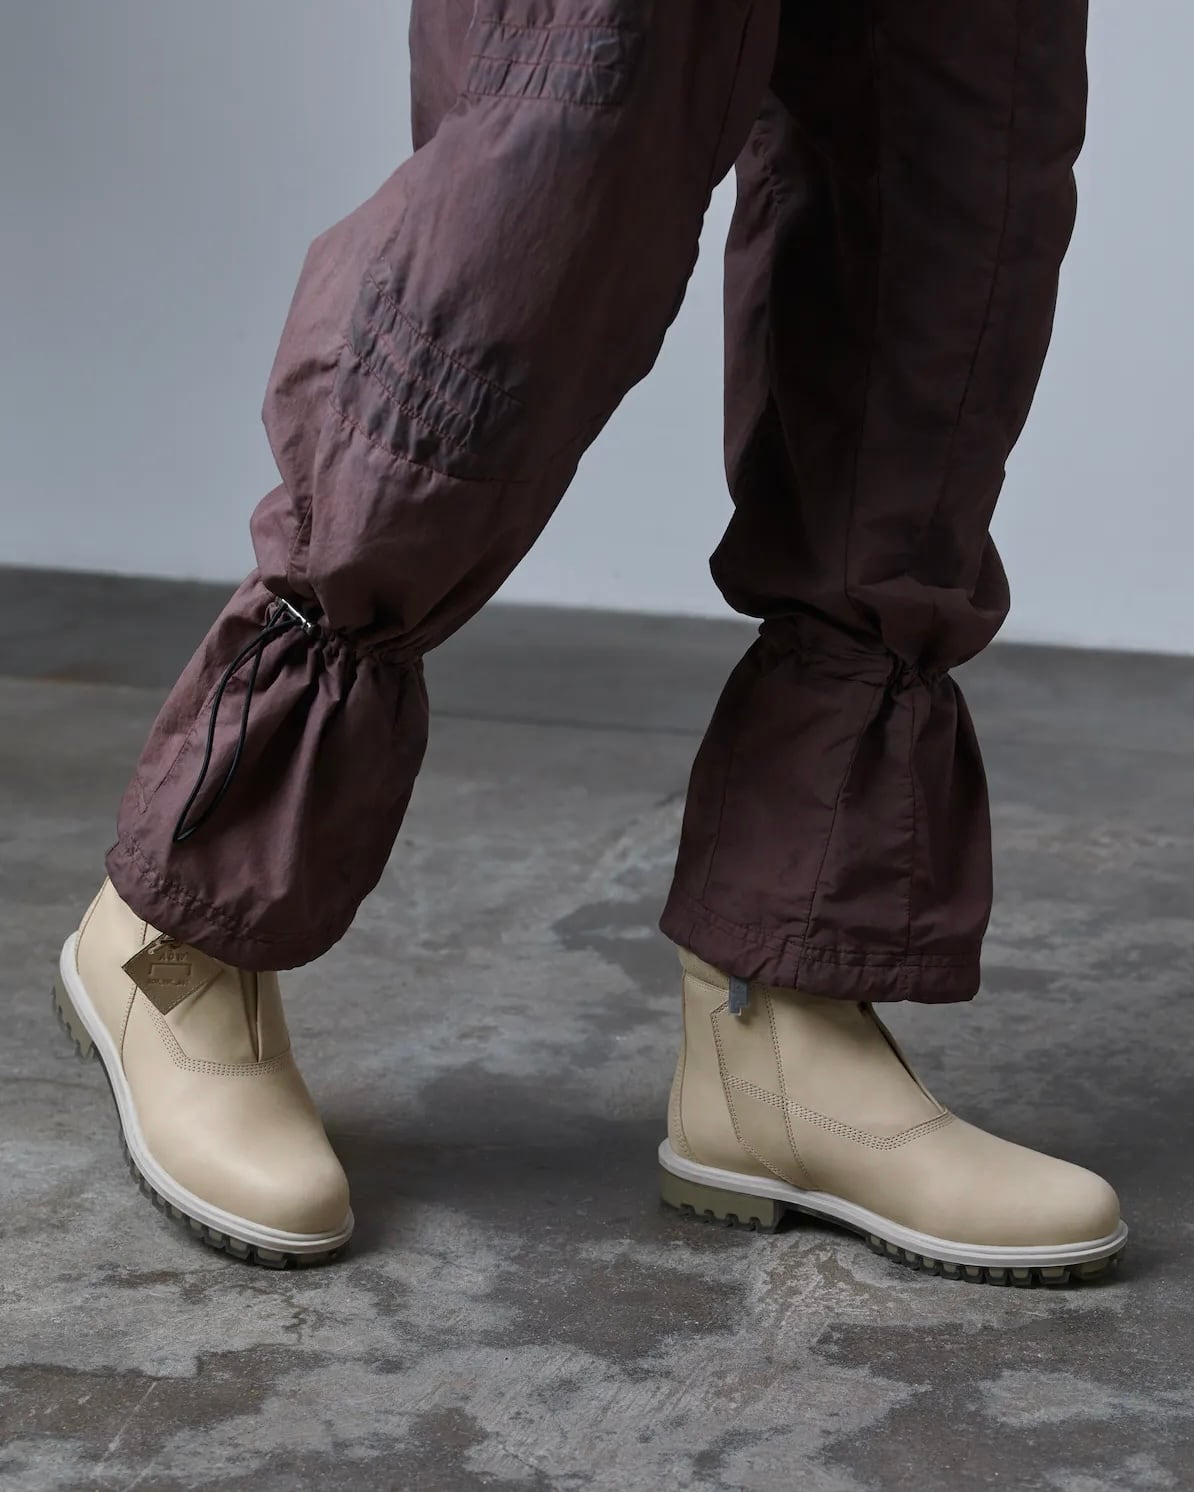 A-COLD-WALL* × TIMBERLAND / 6 INCH BOOT | Answer